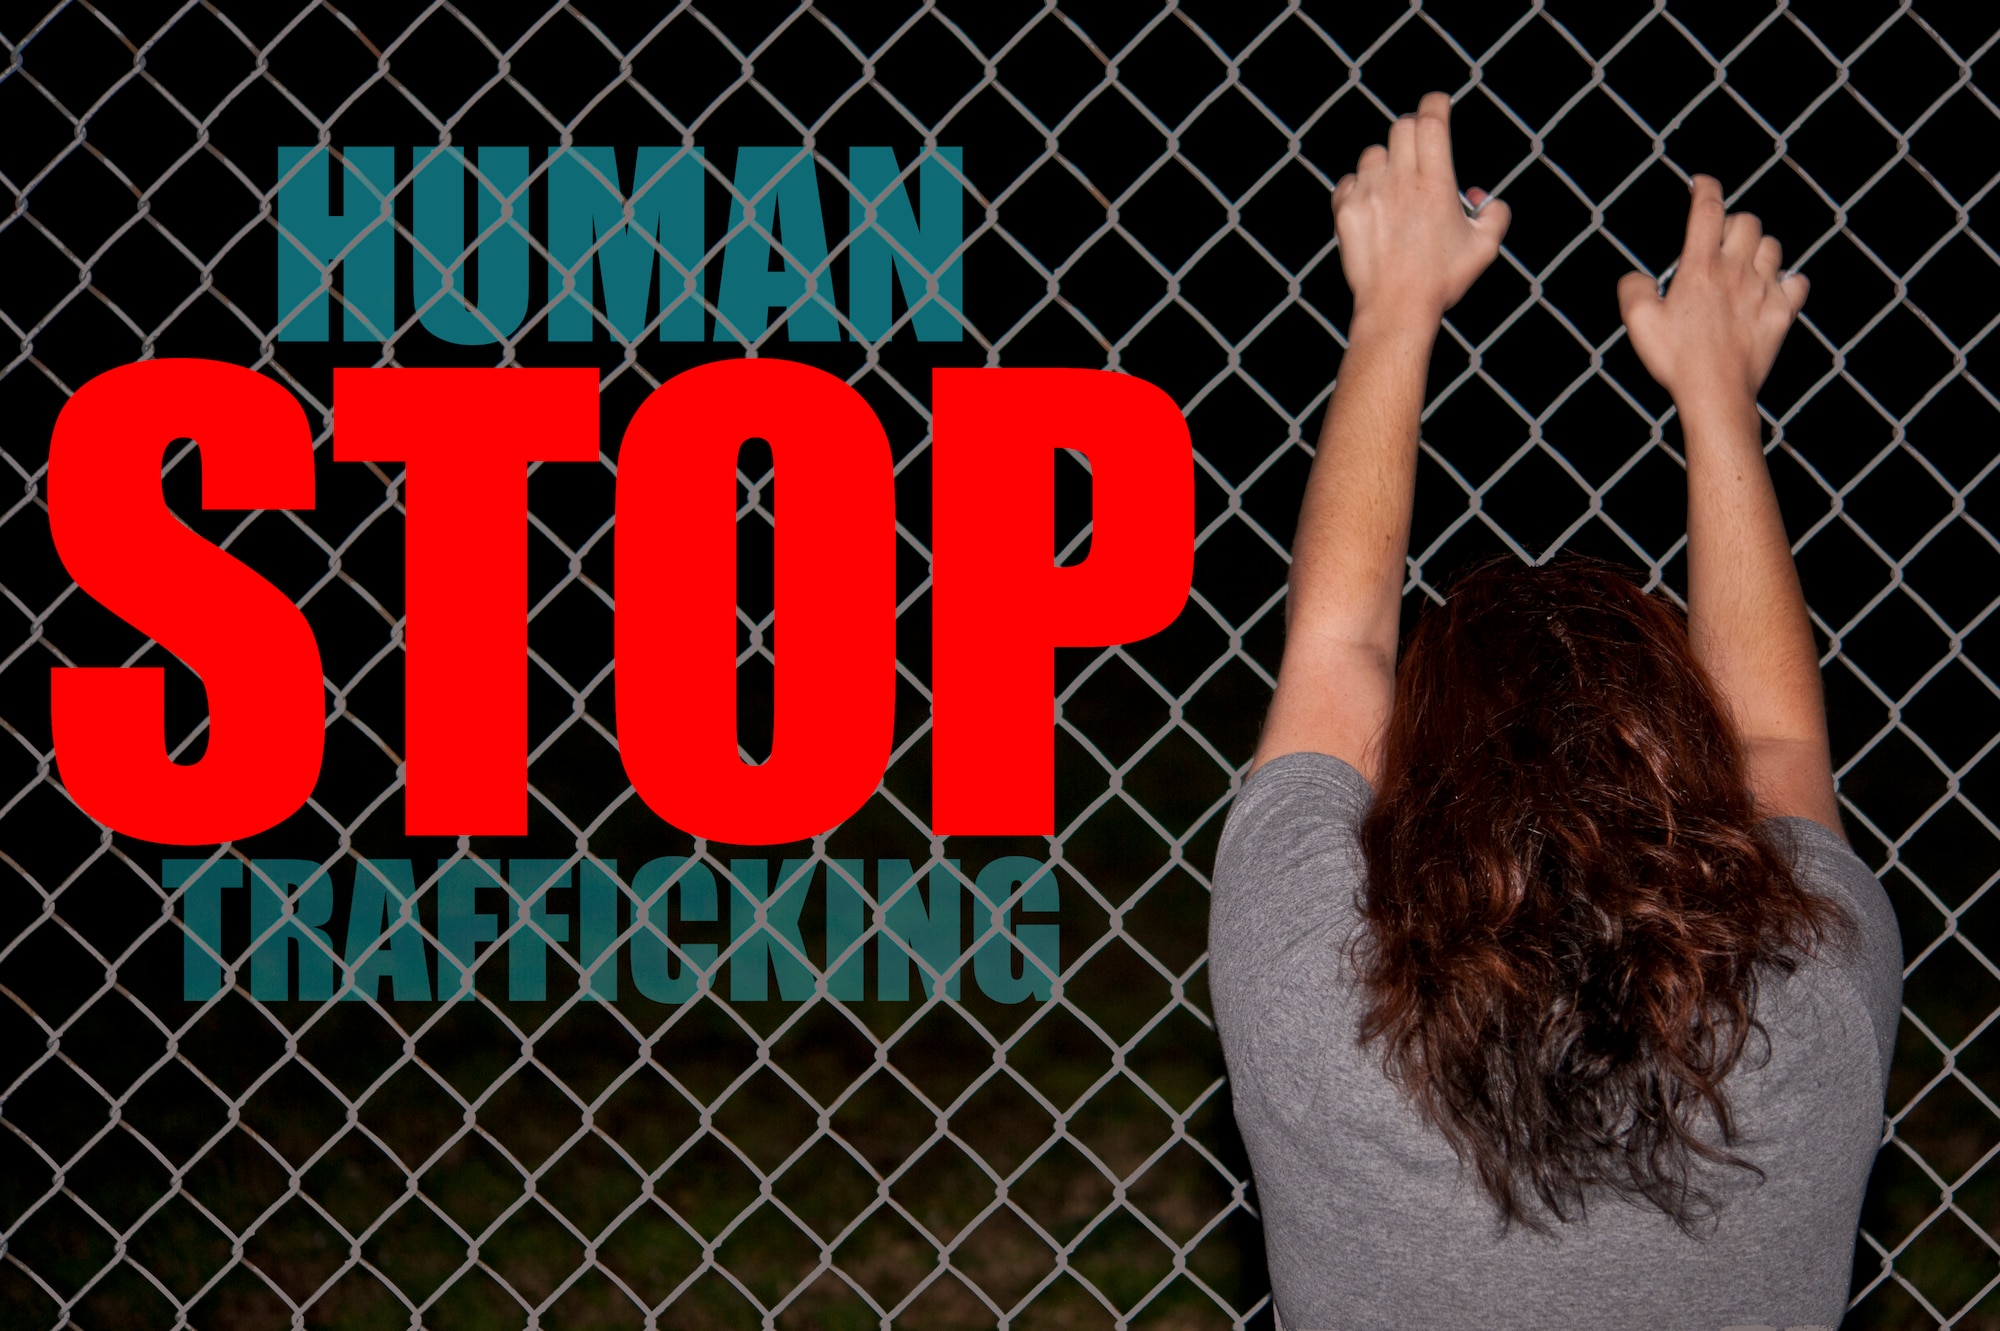 Human trafficking is a crime involving the exploitation of someone for the purposes of involuntary labor or a commercial sex act through the use of force, fraud or coercion. The Department of Defense began the Combating Trafficking In Persons Program in 2014 in order to mitigate the effects of human trafficking not just in the U.S., but also abroad. (U.S. Air Force photo illustration by Airman Shawna L. Keyes)